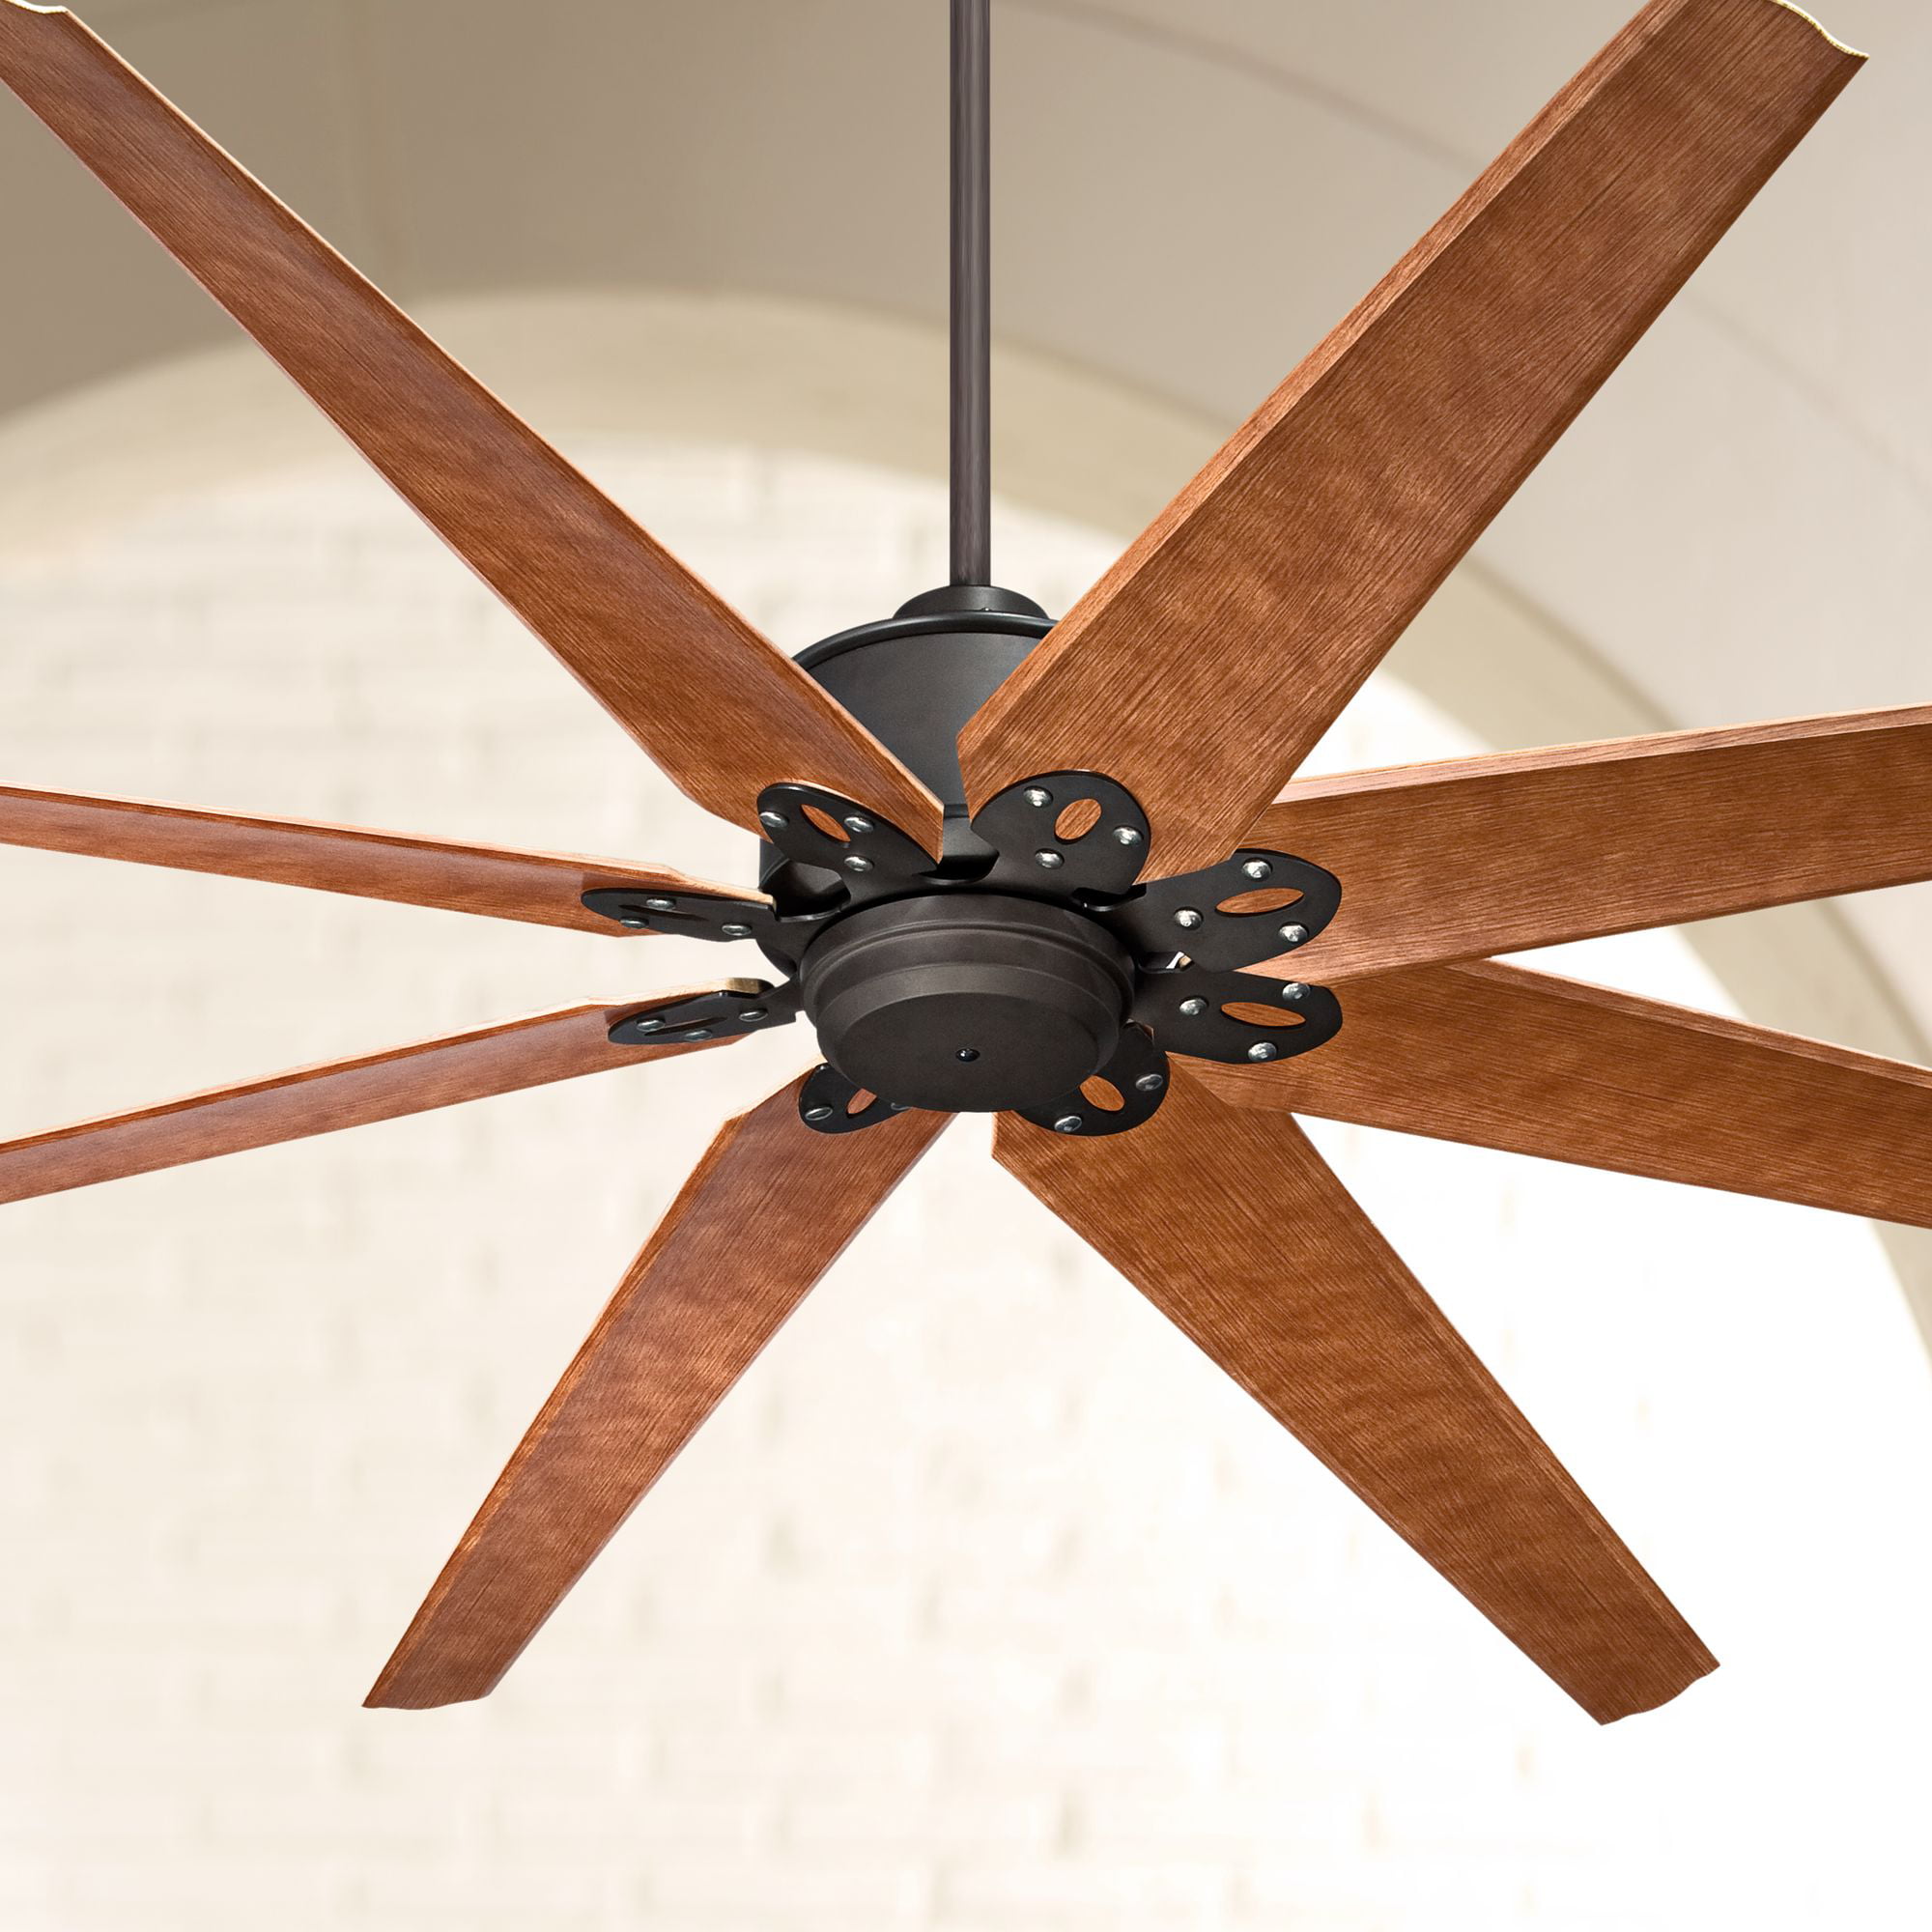 72" Casa Vieja Outdoor Ceiling Fan with Remote Control ...